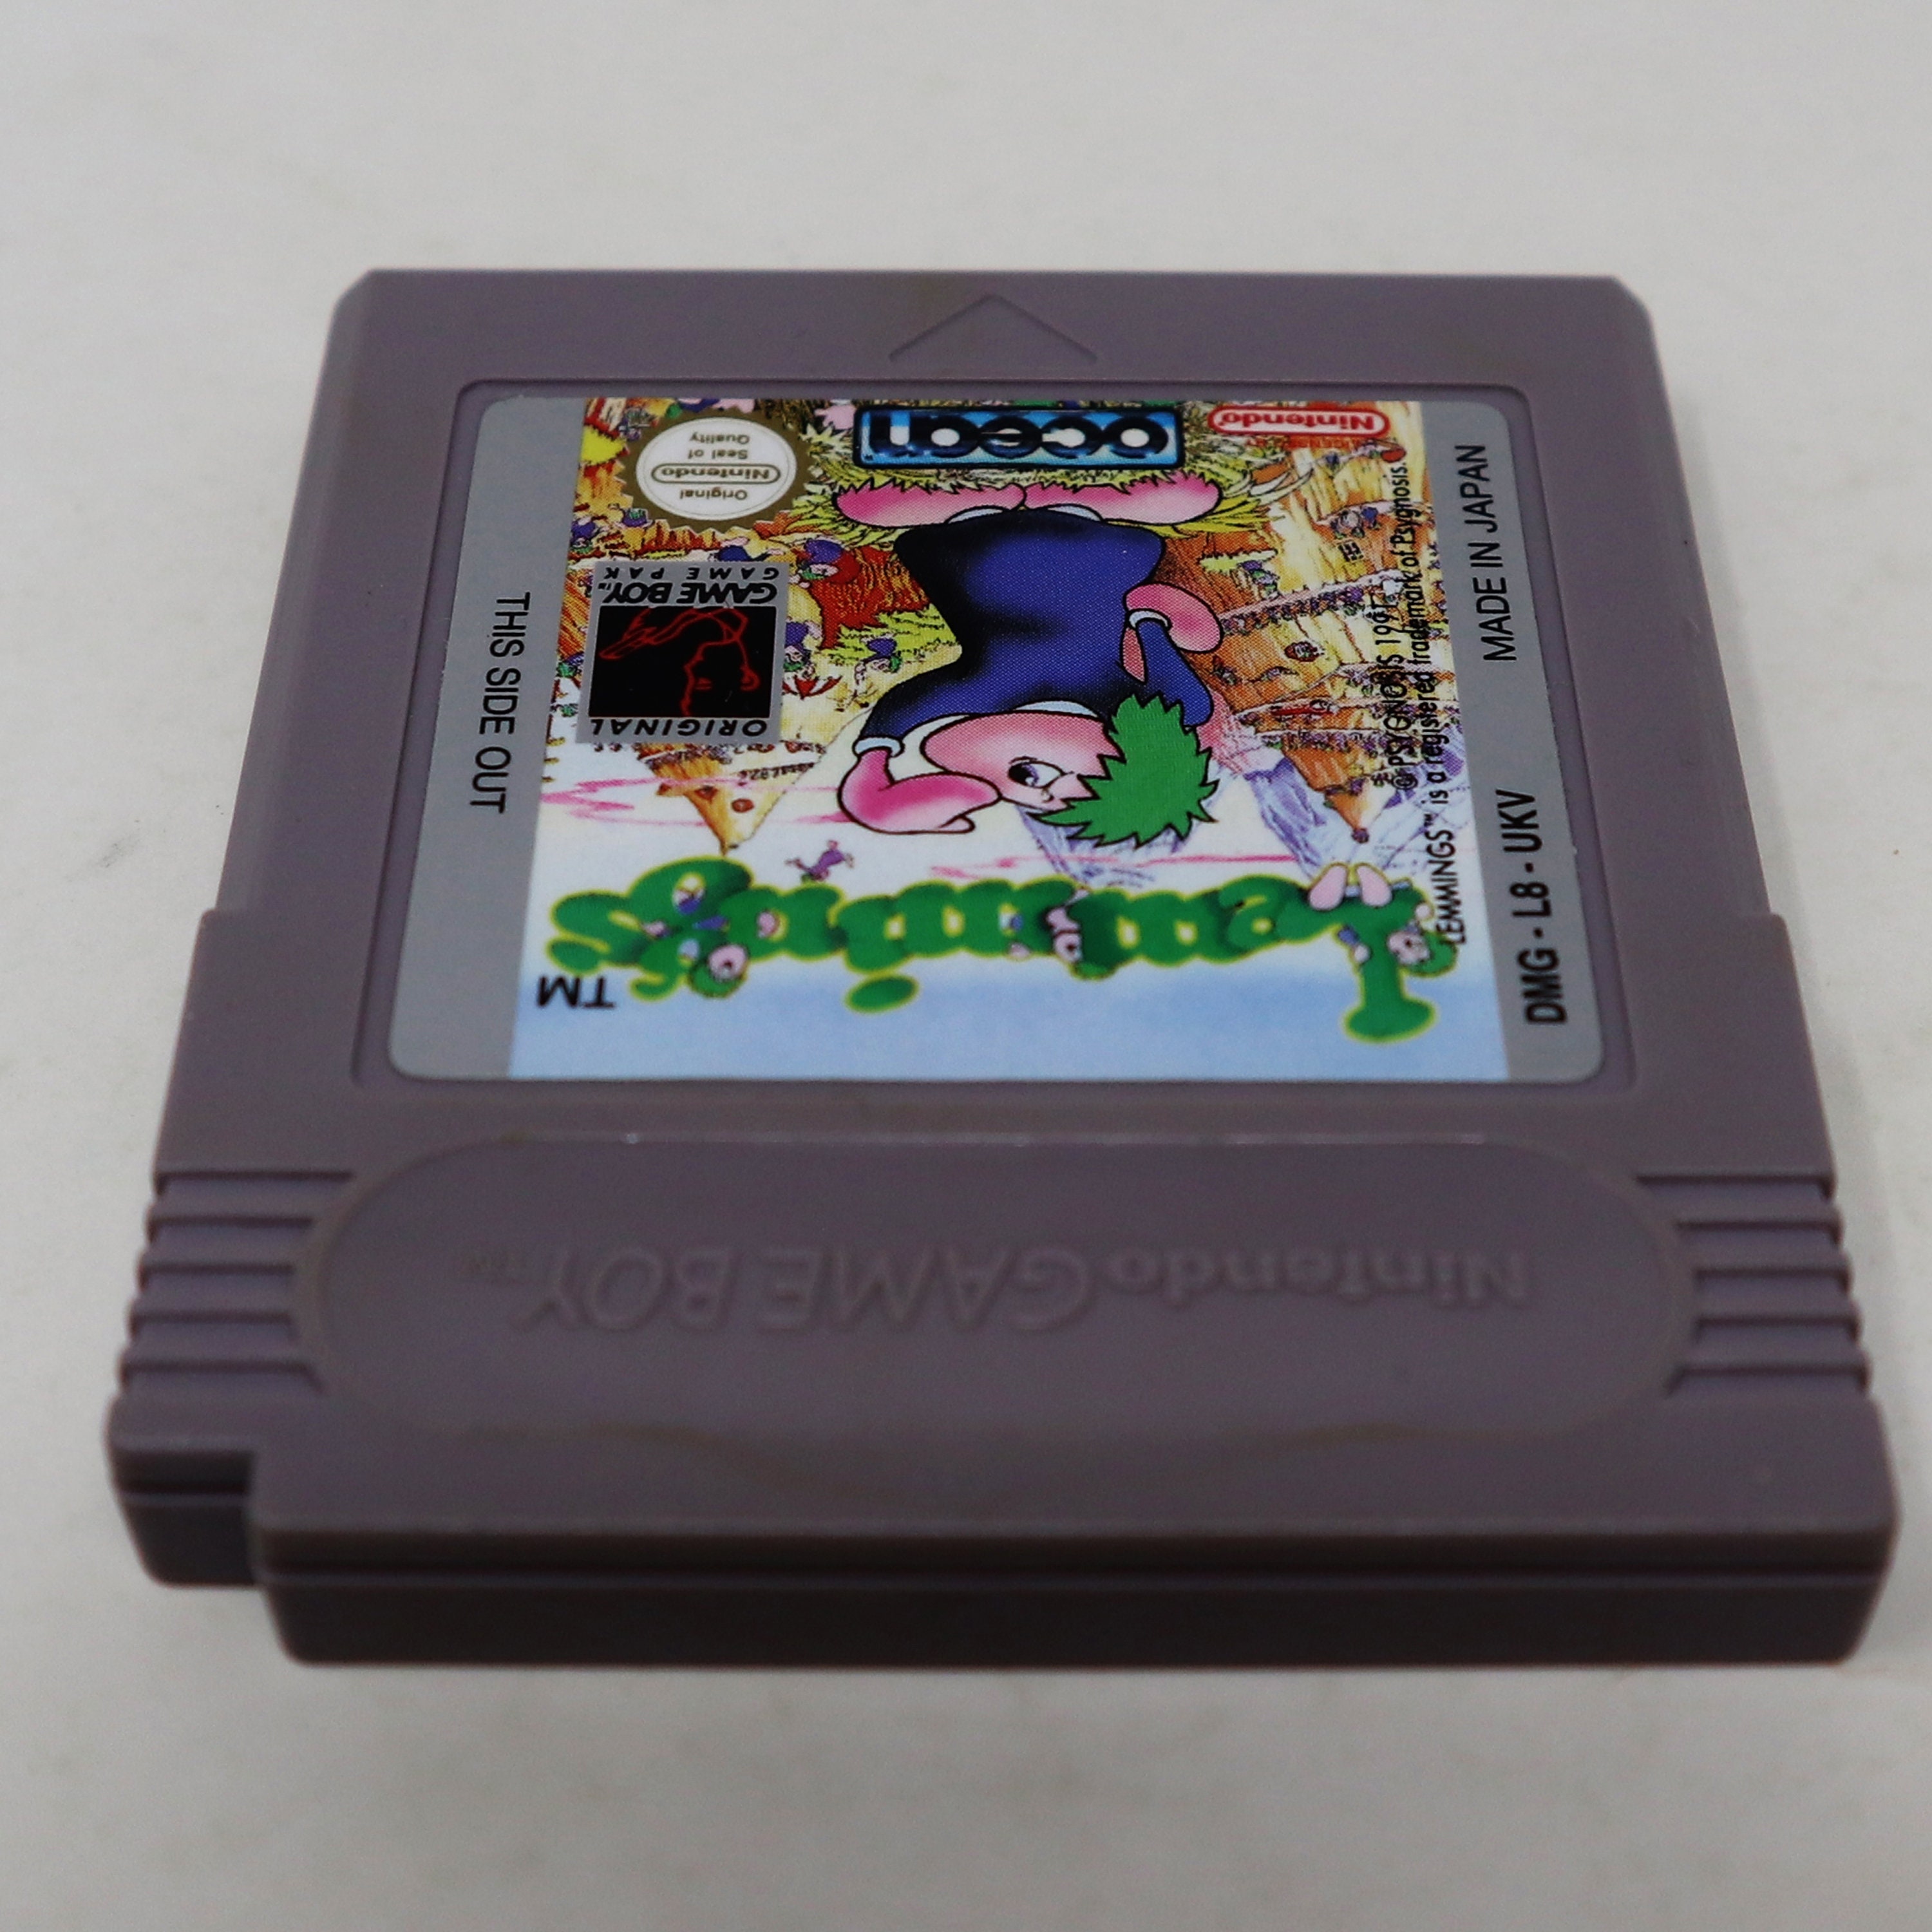 Vintage 1994 90s Game Boy Compact Video Game System Lemmings 2 